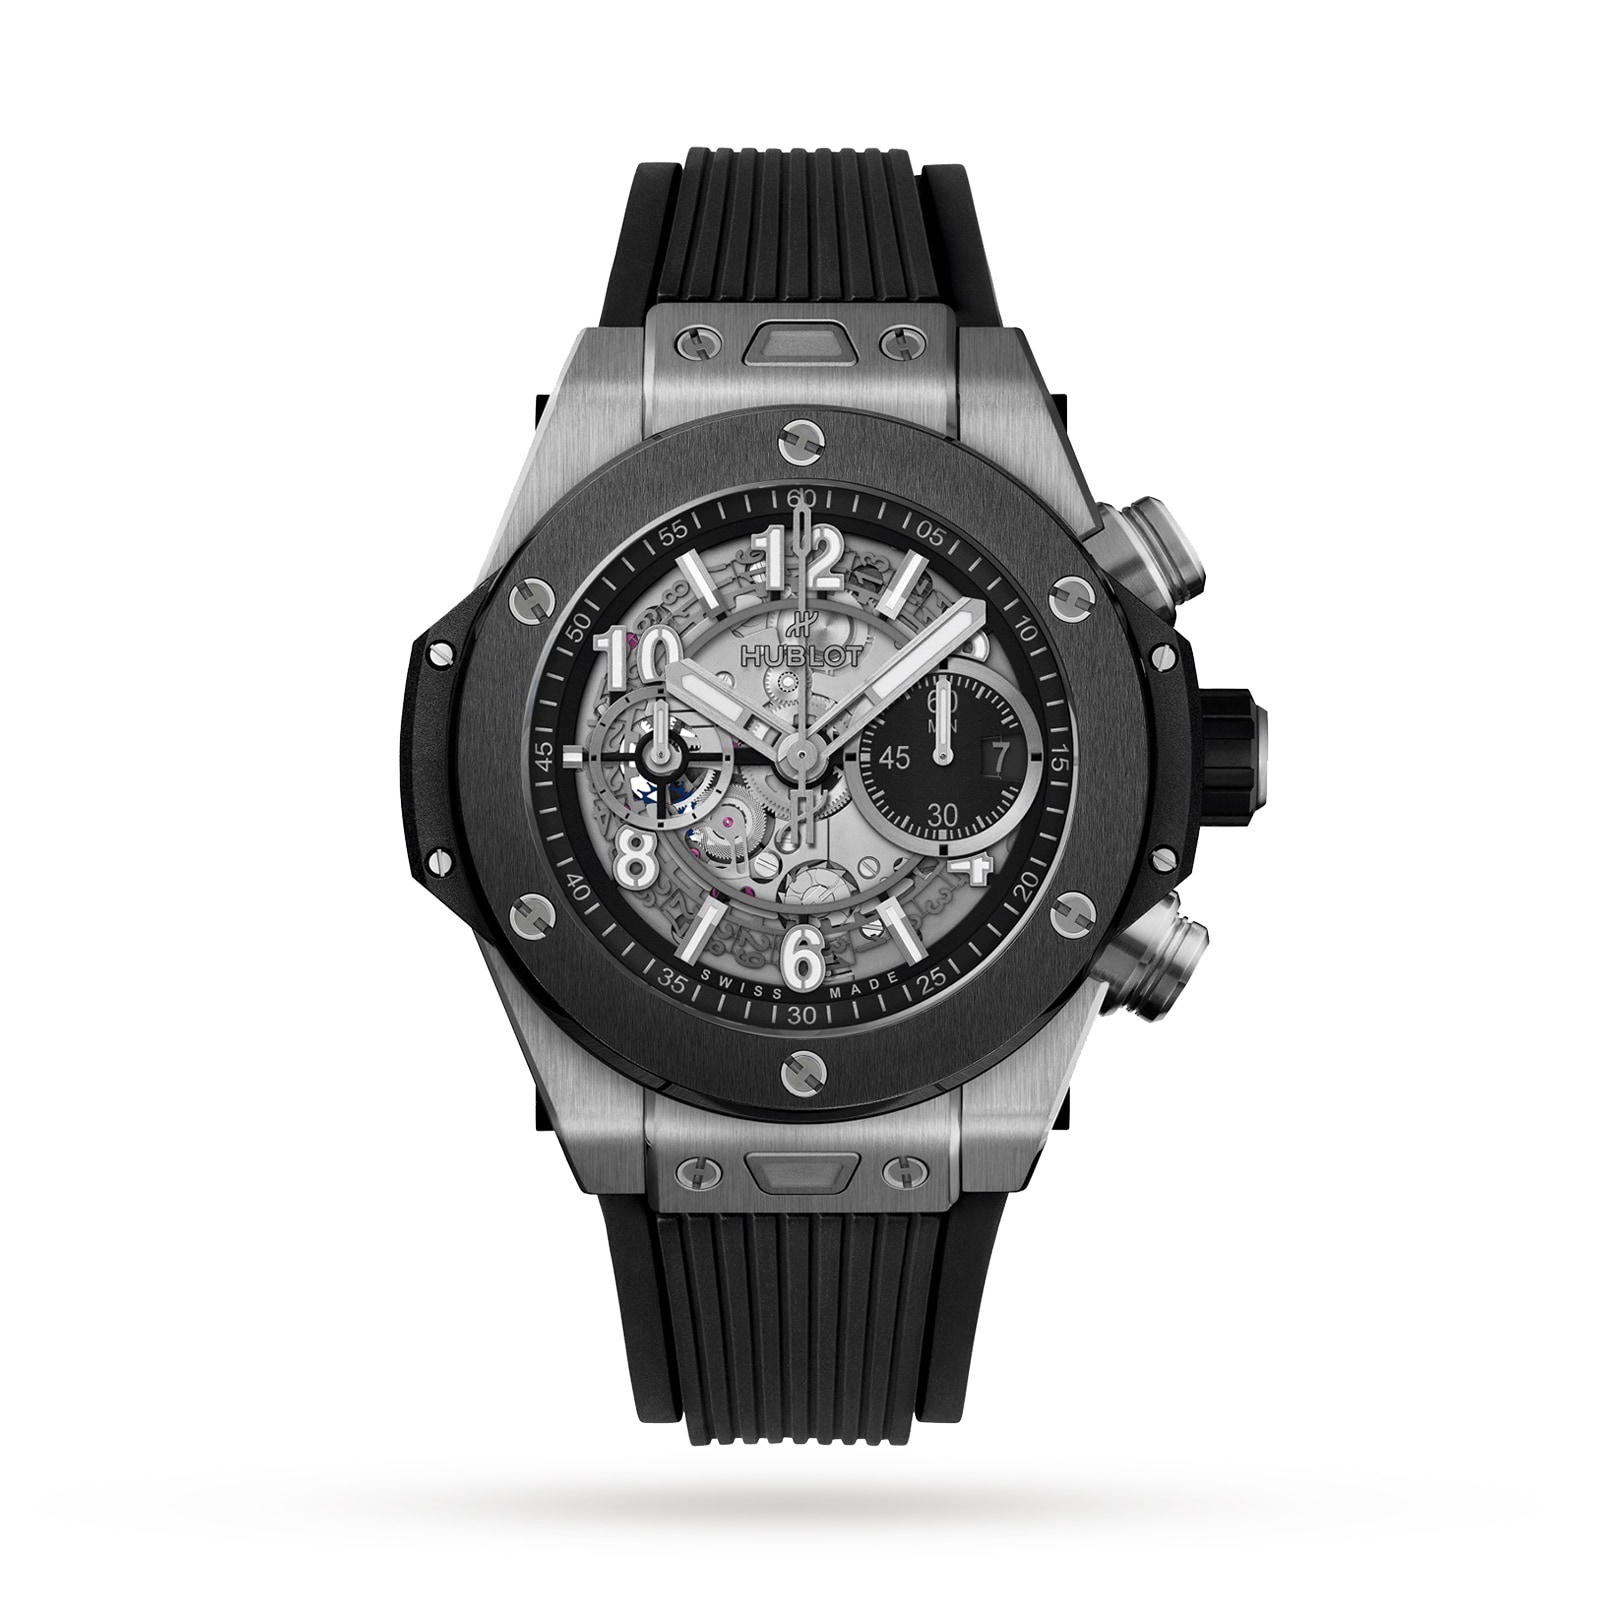 Used Hublot Big bang geneve 582888 watch ($2,500) for sale - Timepeaks